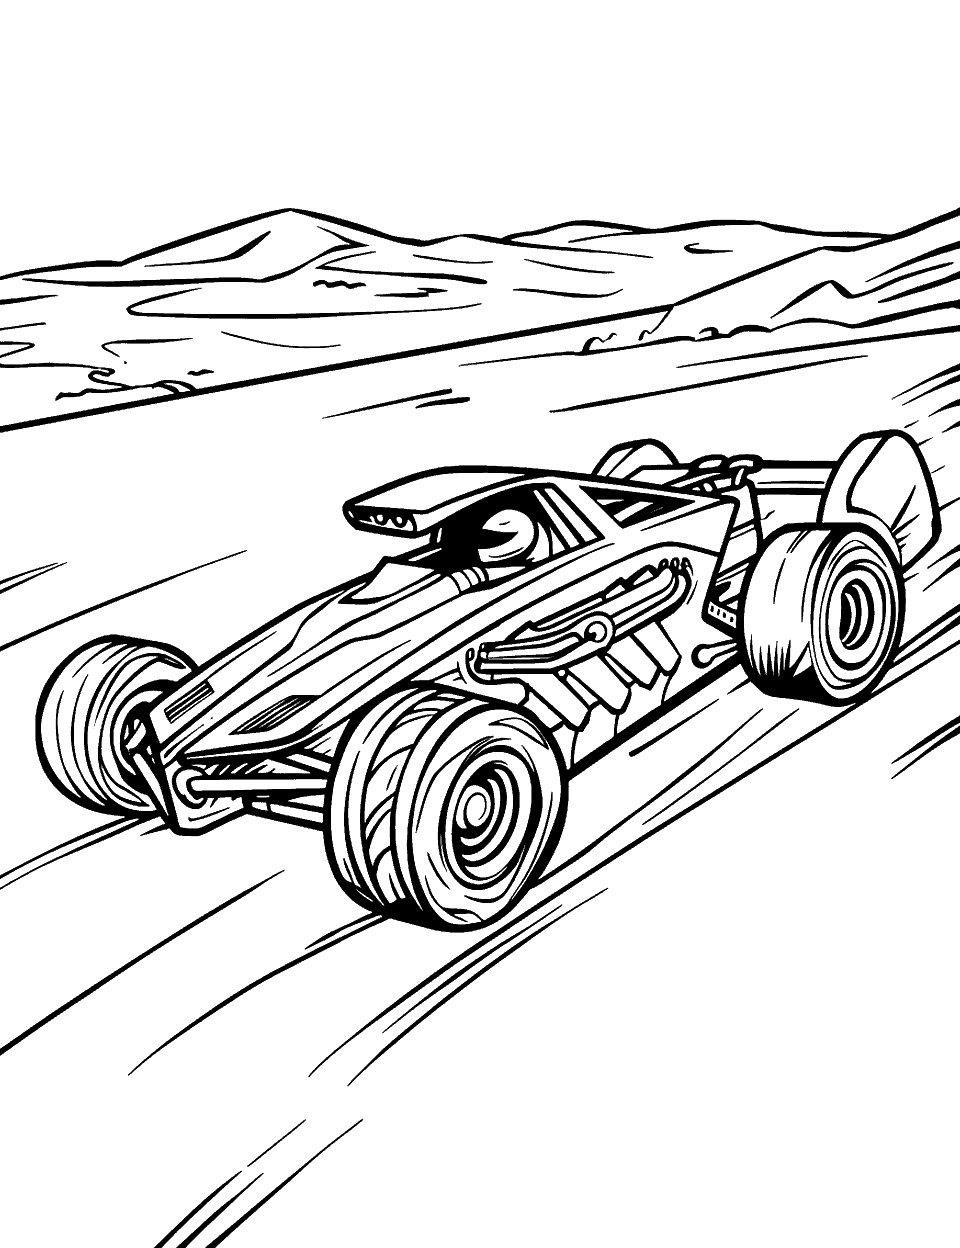 Turbo Racer Coloring Page - A Hot Wheel car speeding on a desert race track.